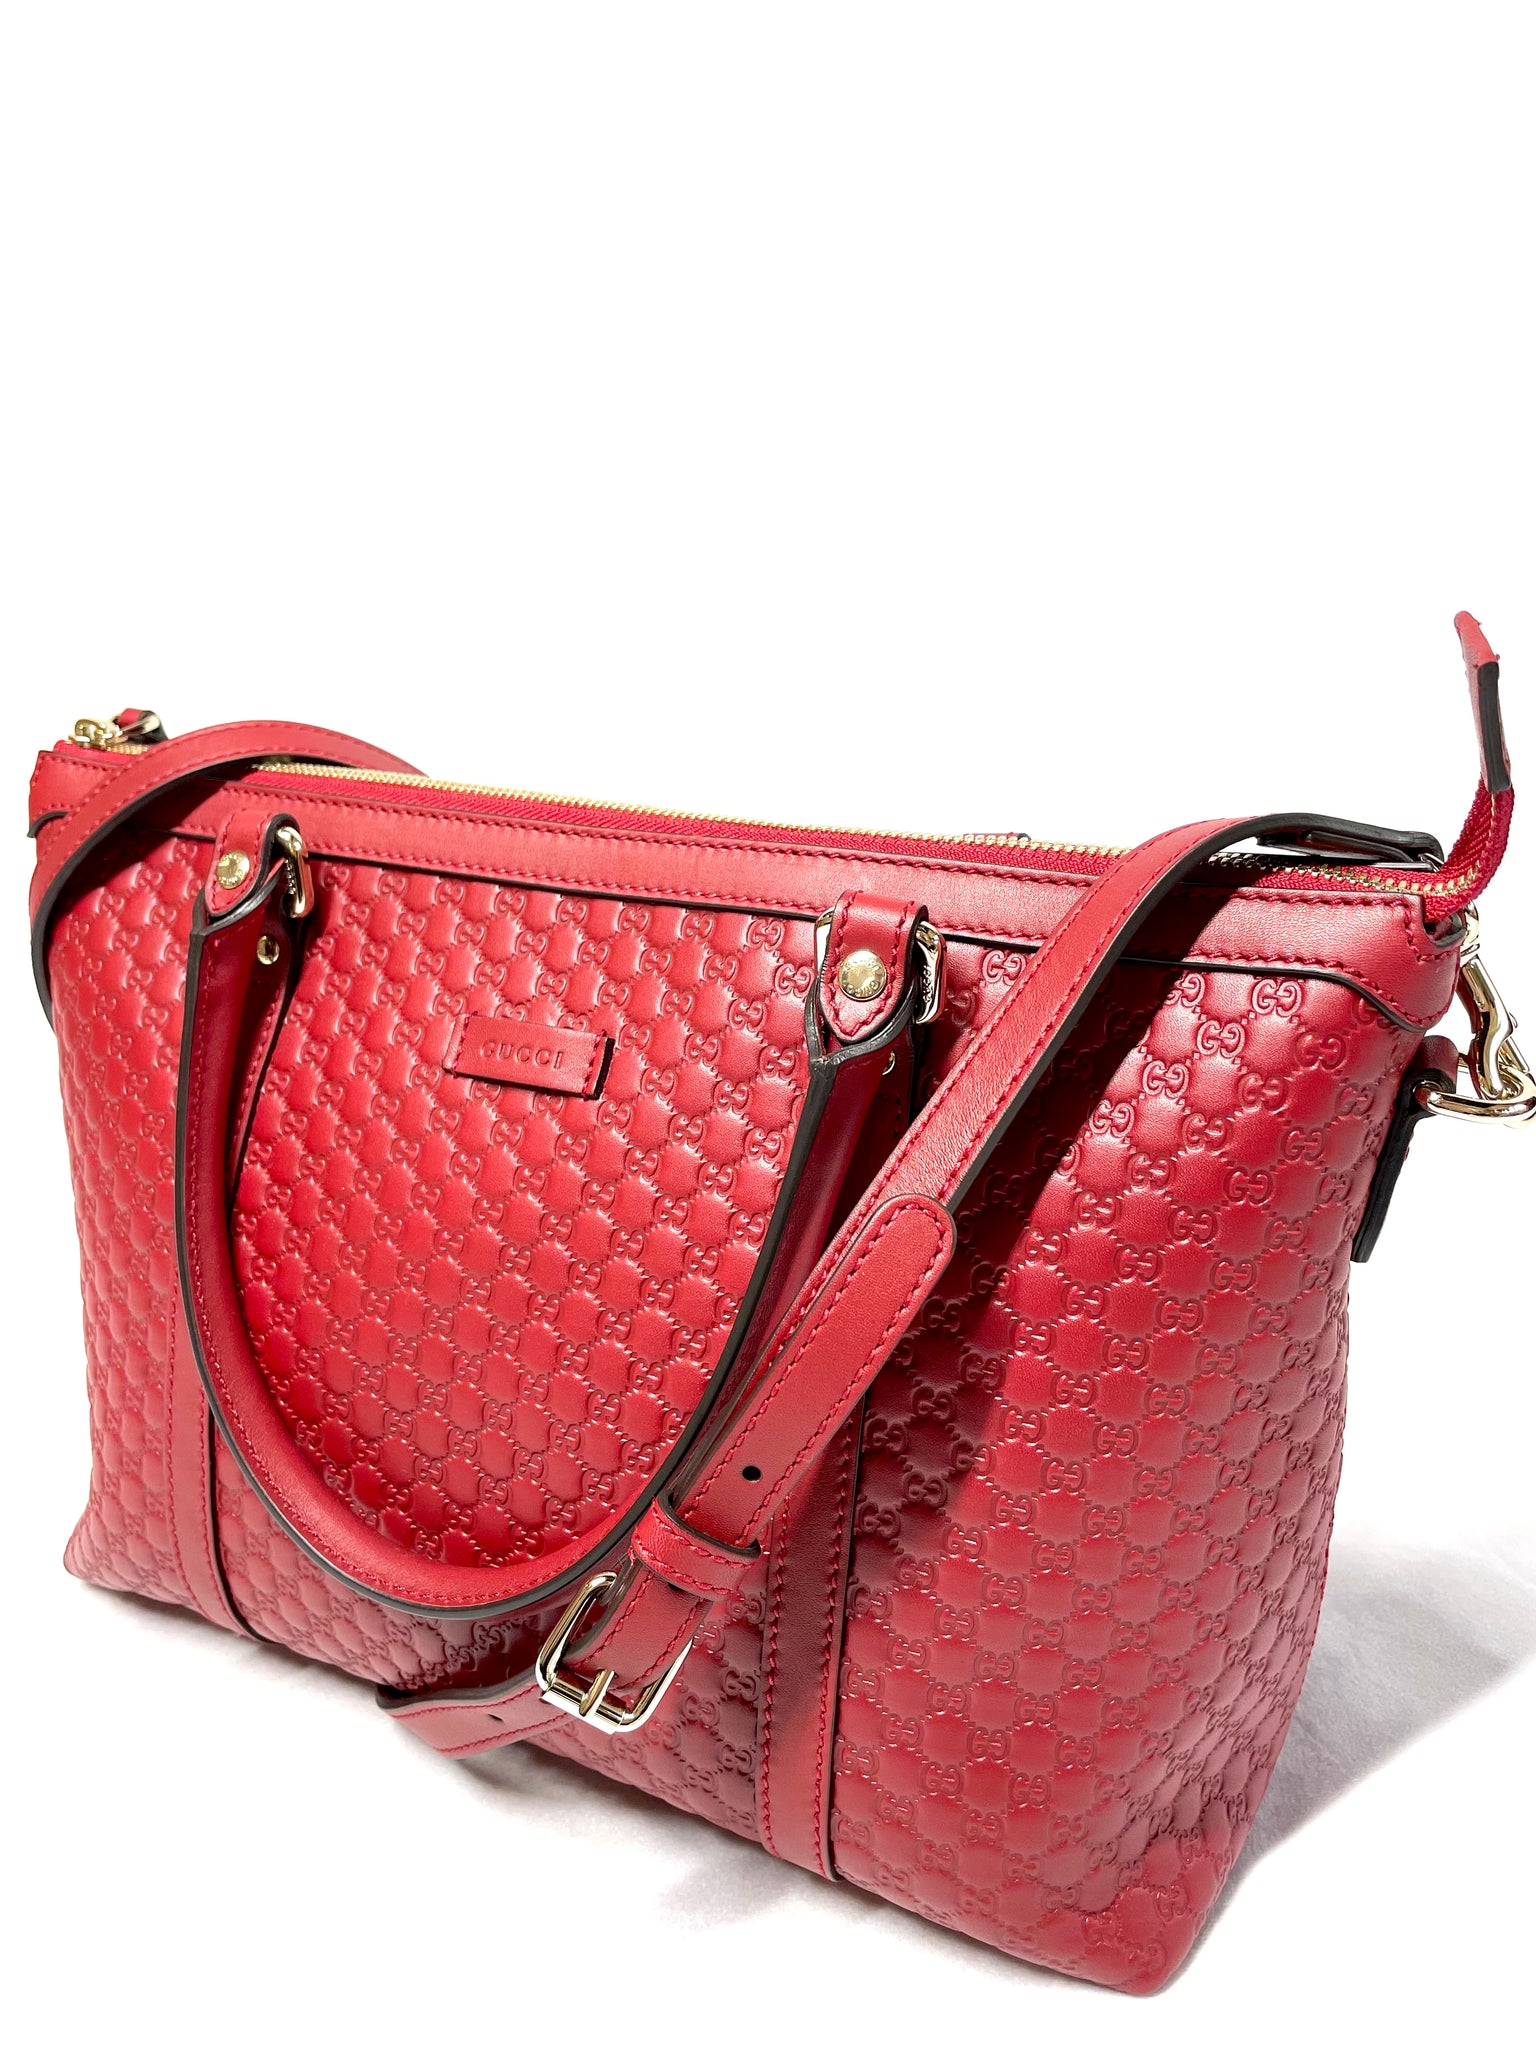 photo of Gucci Red Micro Guccissimo Convertible Tote bag available at UniKoncept in Waterloo